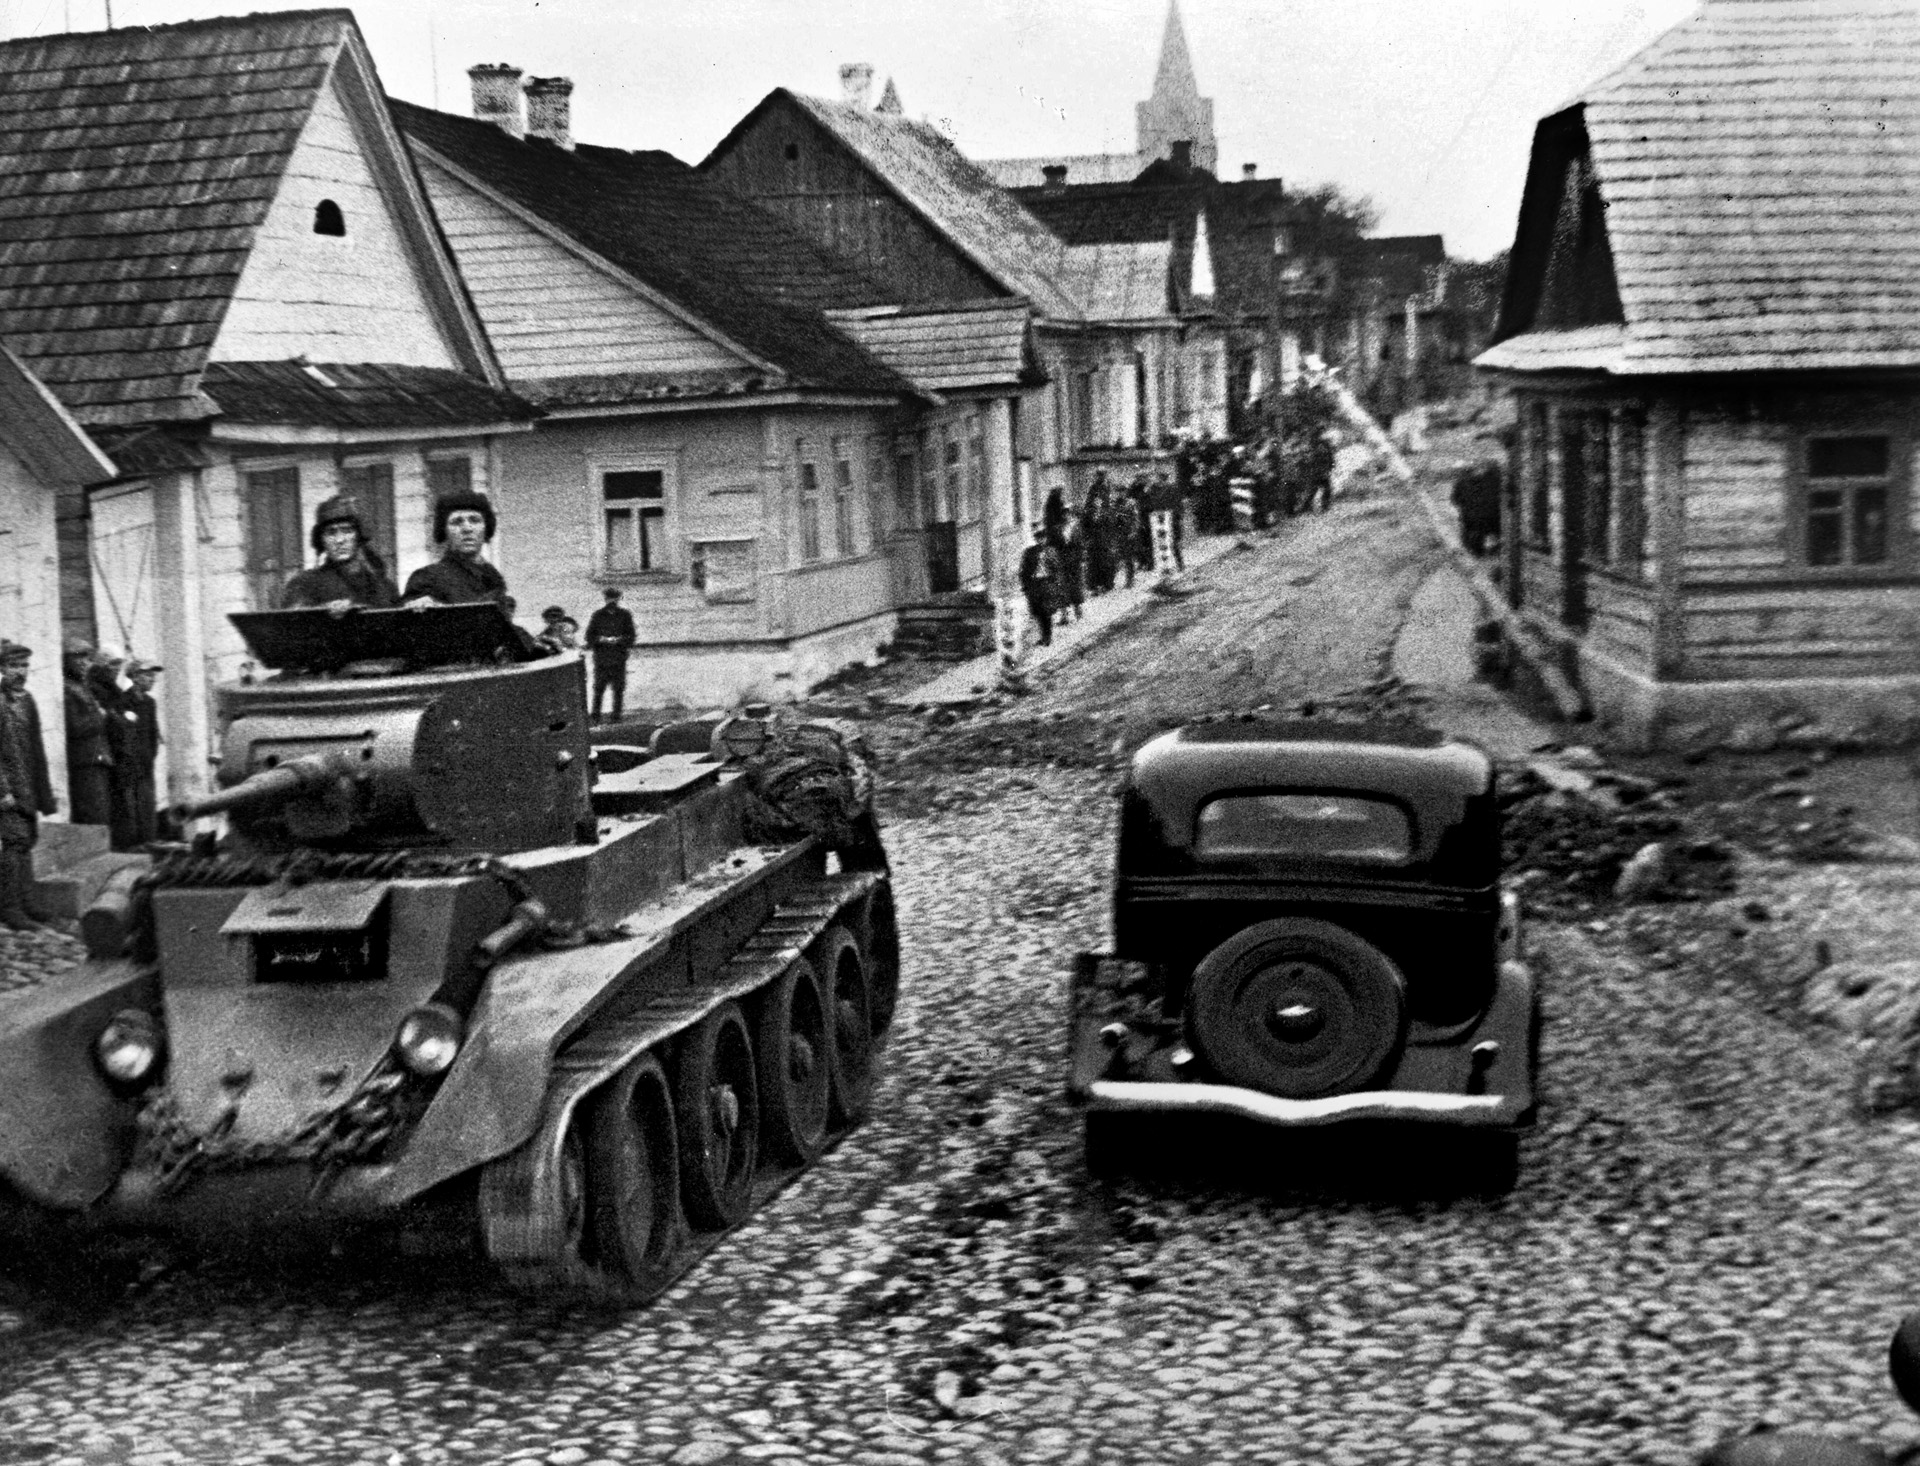 A Red Army tank rolls along a dirt road in the Polish town of Rakov.